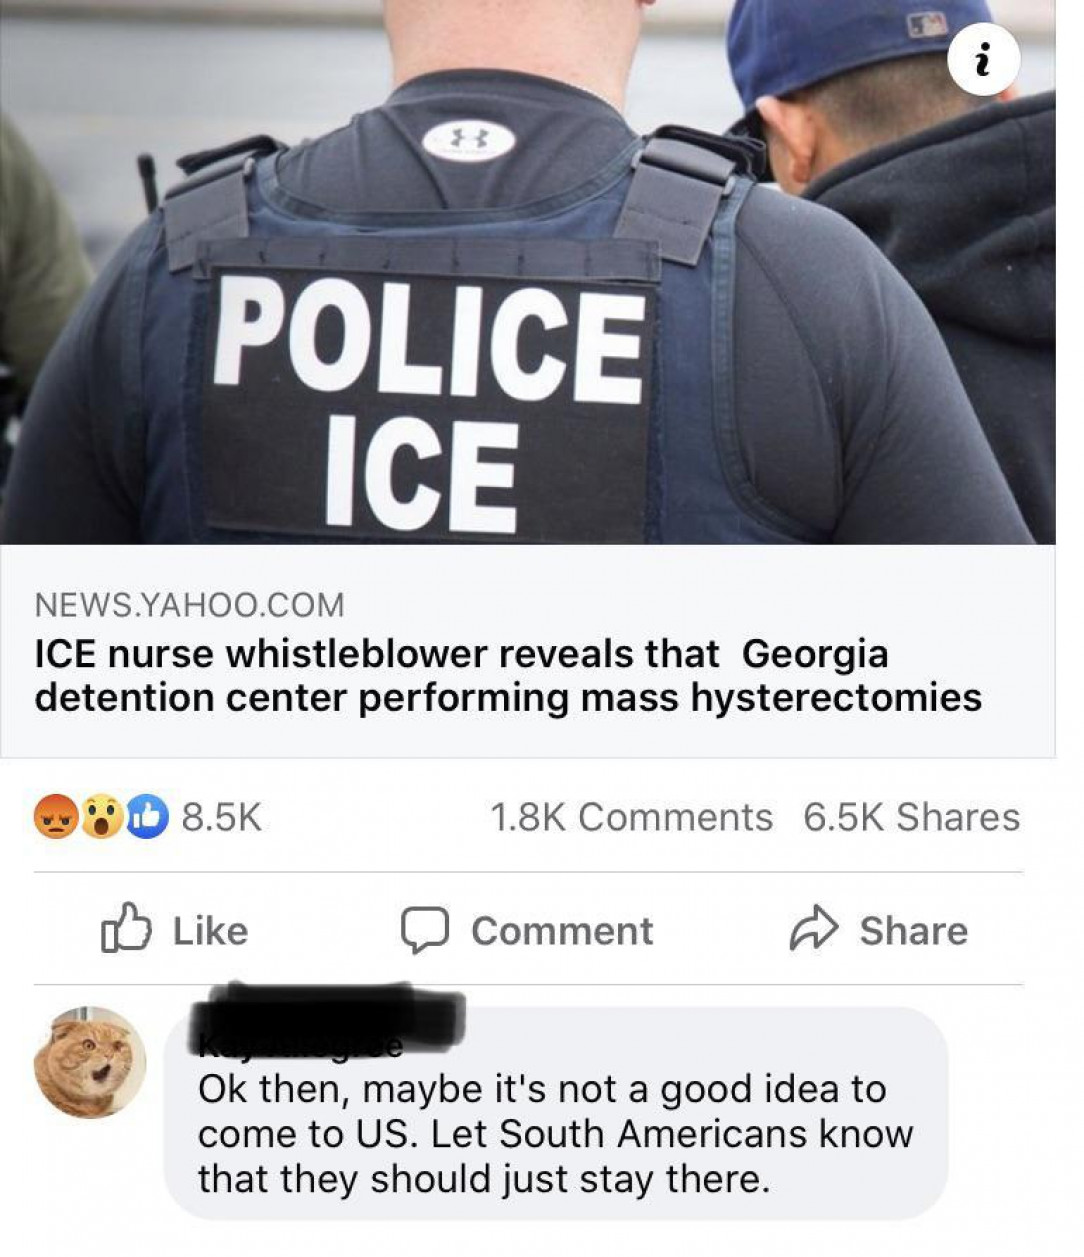 Thinking it’s ok to perform unnecessary surgery on people detained by ICE